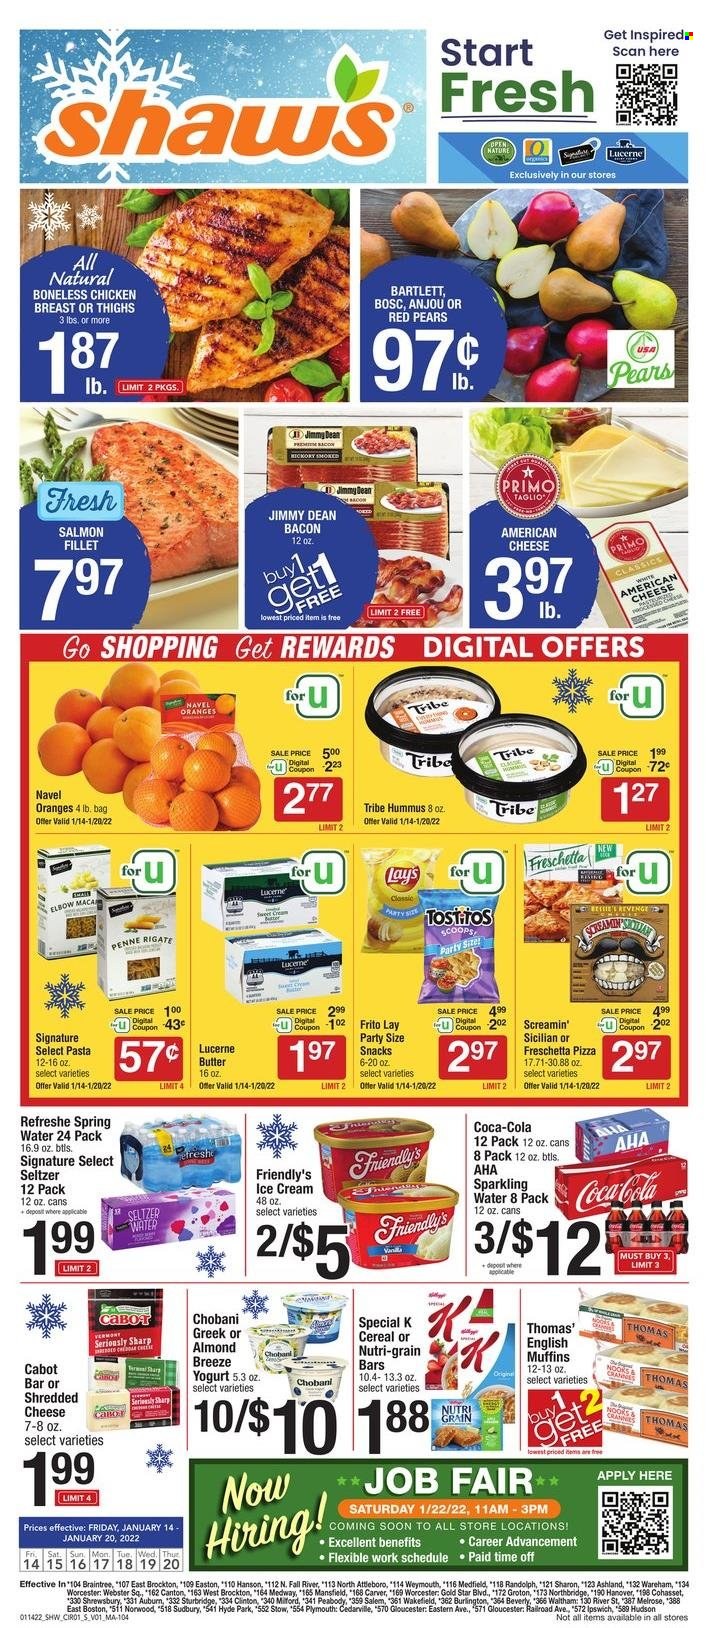 thumbnail - Shaw’s Flyer - 01/14/2022 - 01/20/2022 - Sales products - english muffins, snack, oranges, fish fillets, salmon, salmon fillet, pizza, pasta, Jimmy Dean, chicken breasts, hummus, american cheese, shredded cheese, greek yoghurt, Chobani, Almond Breeze, ice cream, Friendly's Ice Cream, Screamin' Sicilian, cereal bar, breakfast bar, Lay’s, Tostitos, salty snack, Nutri-Grain, penne, Coca-Cola, soft drink, seltzer water, spring water, sparkling water, water, carbonated soft drink, chicken thighs, chicken, navel oranges. Page 1.